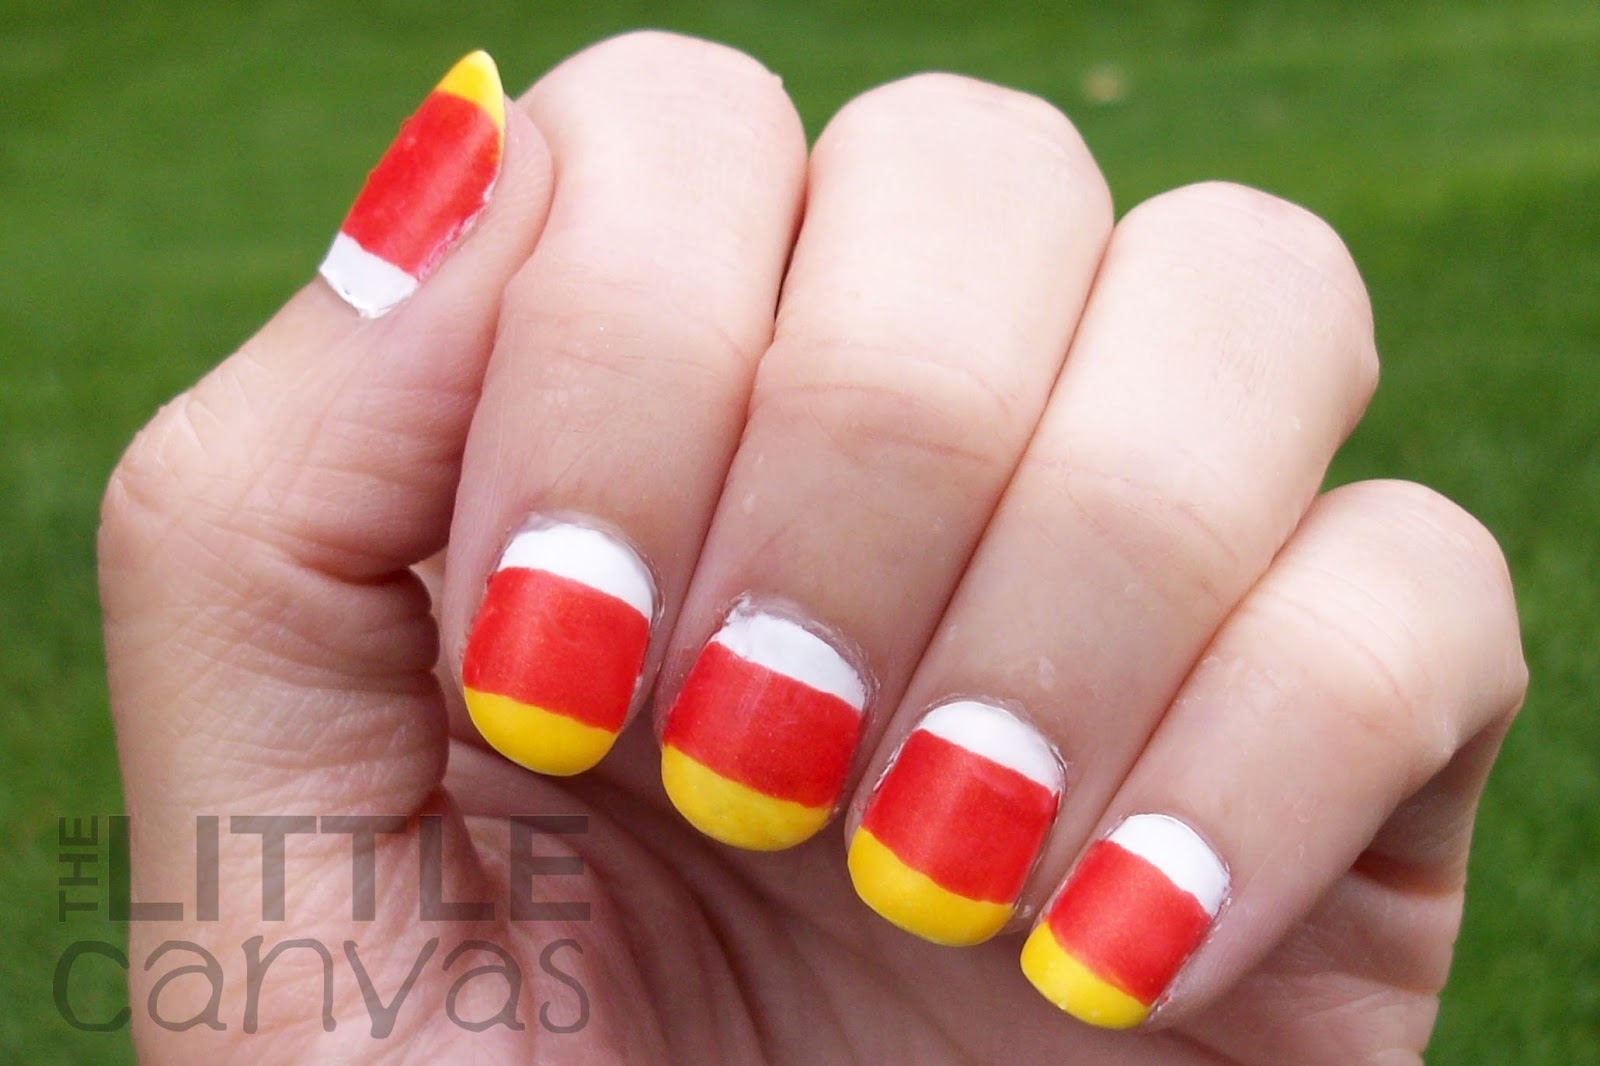 4. 20 Candy Corn Nail Designs for a Festive Halloween Manicure - wide 8